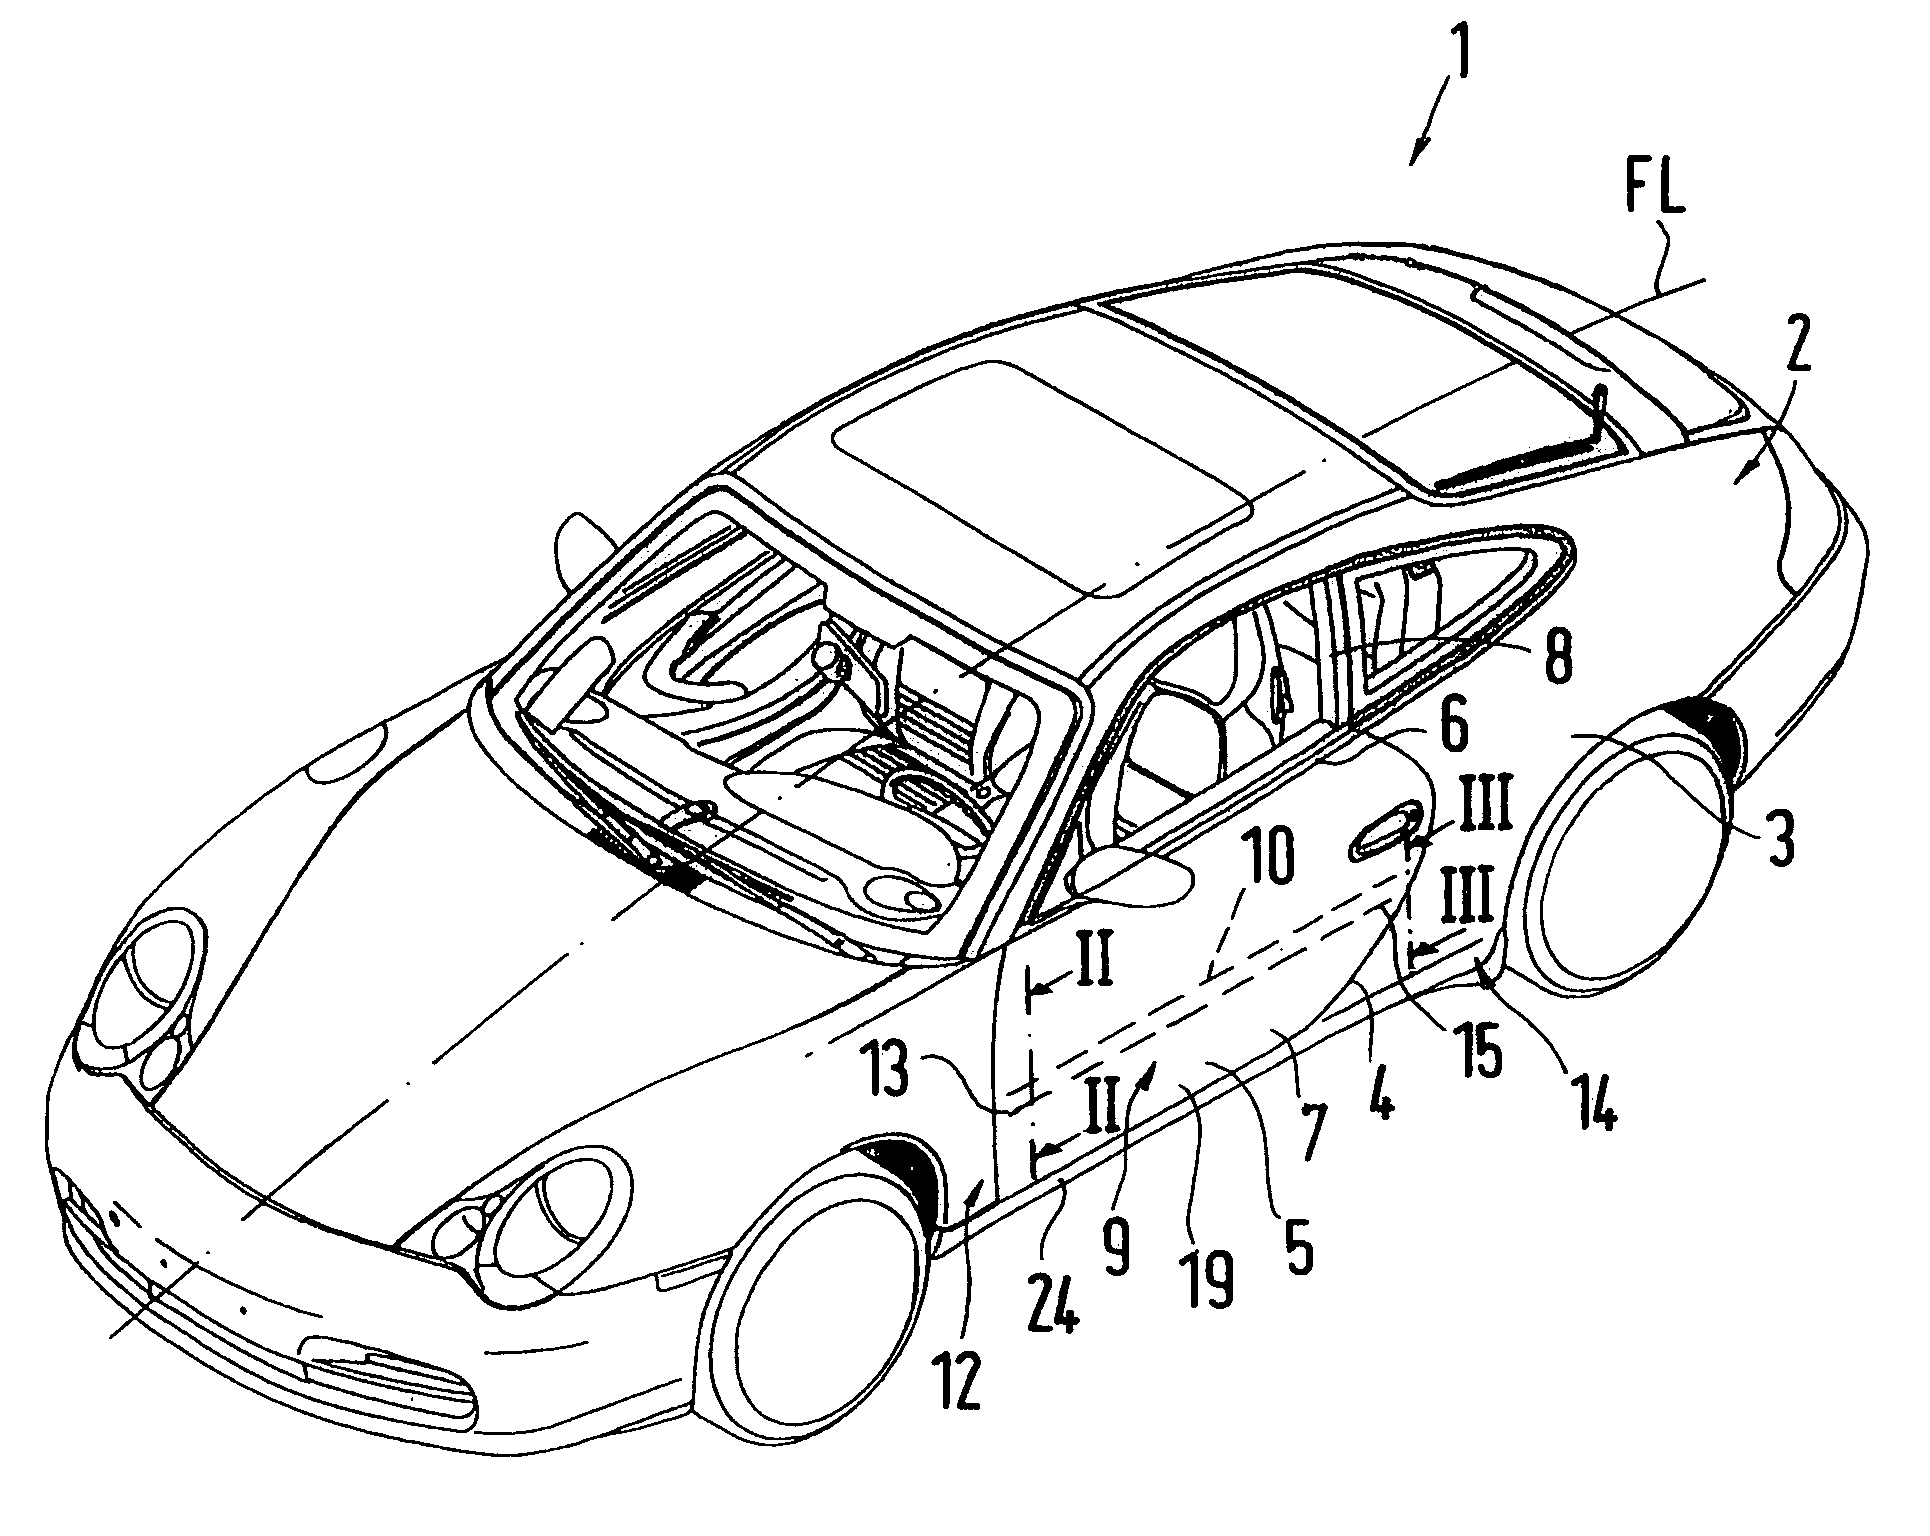 Motor vehicle door with a lateral impact protection device